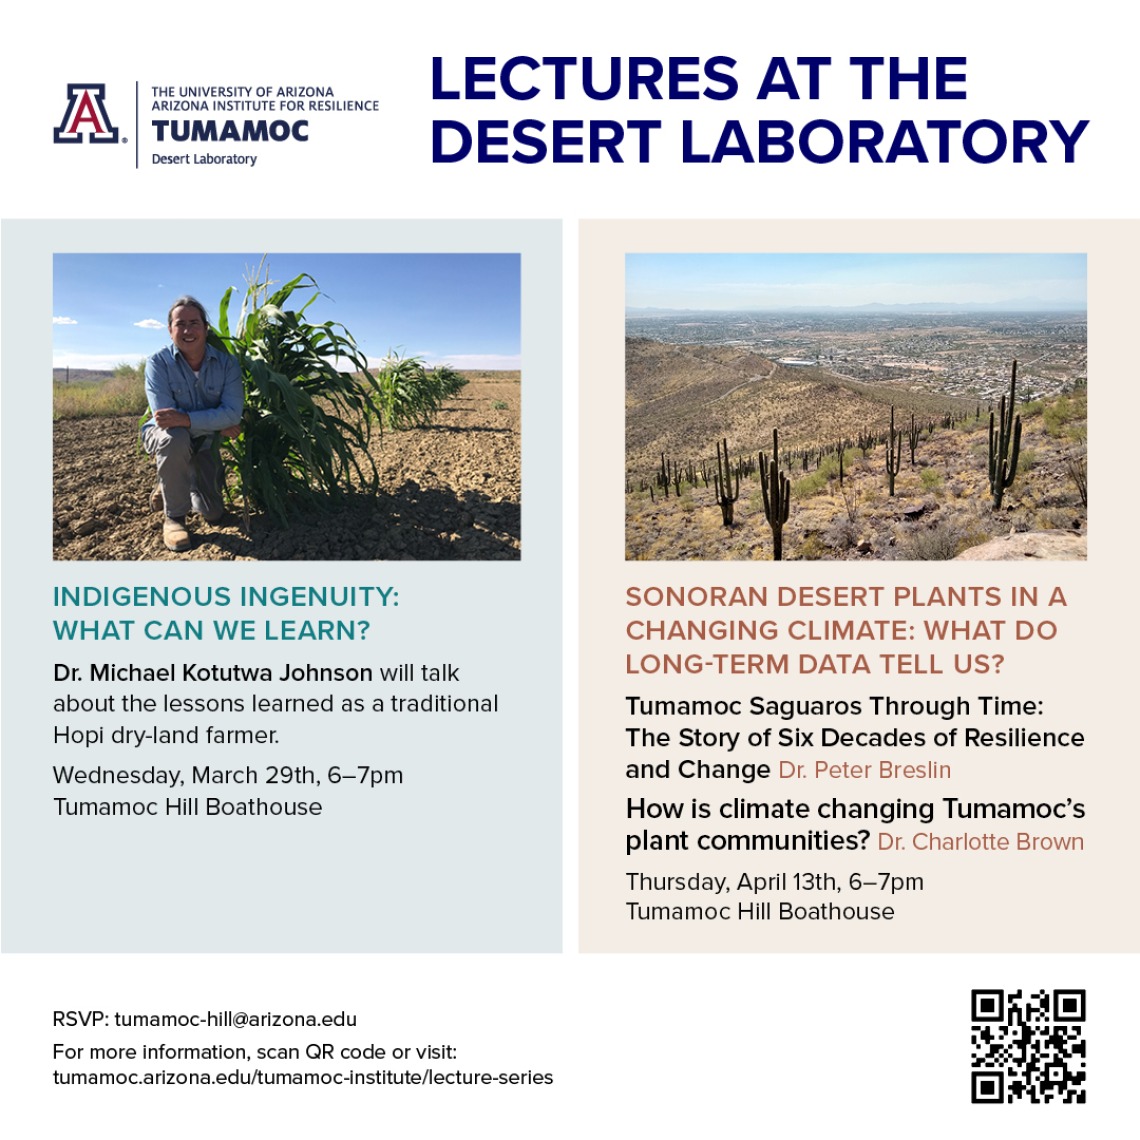 Spring Lecture Series Flyer